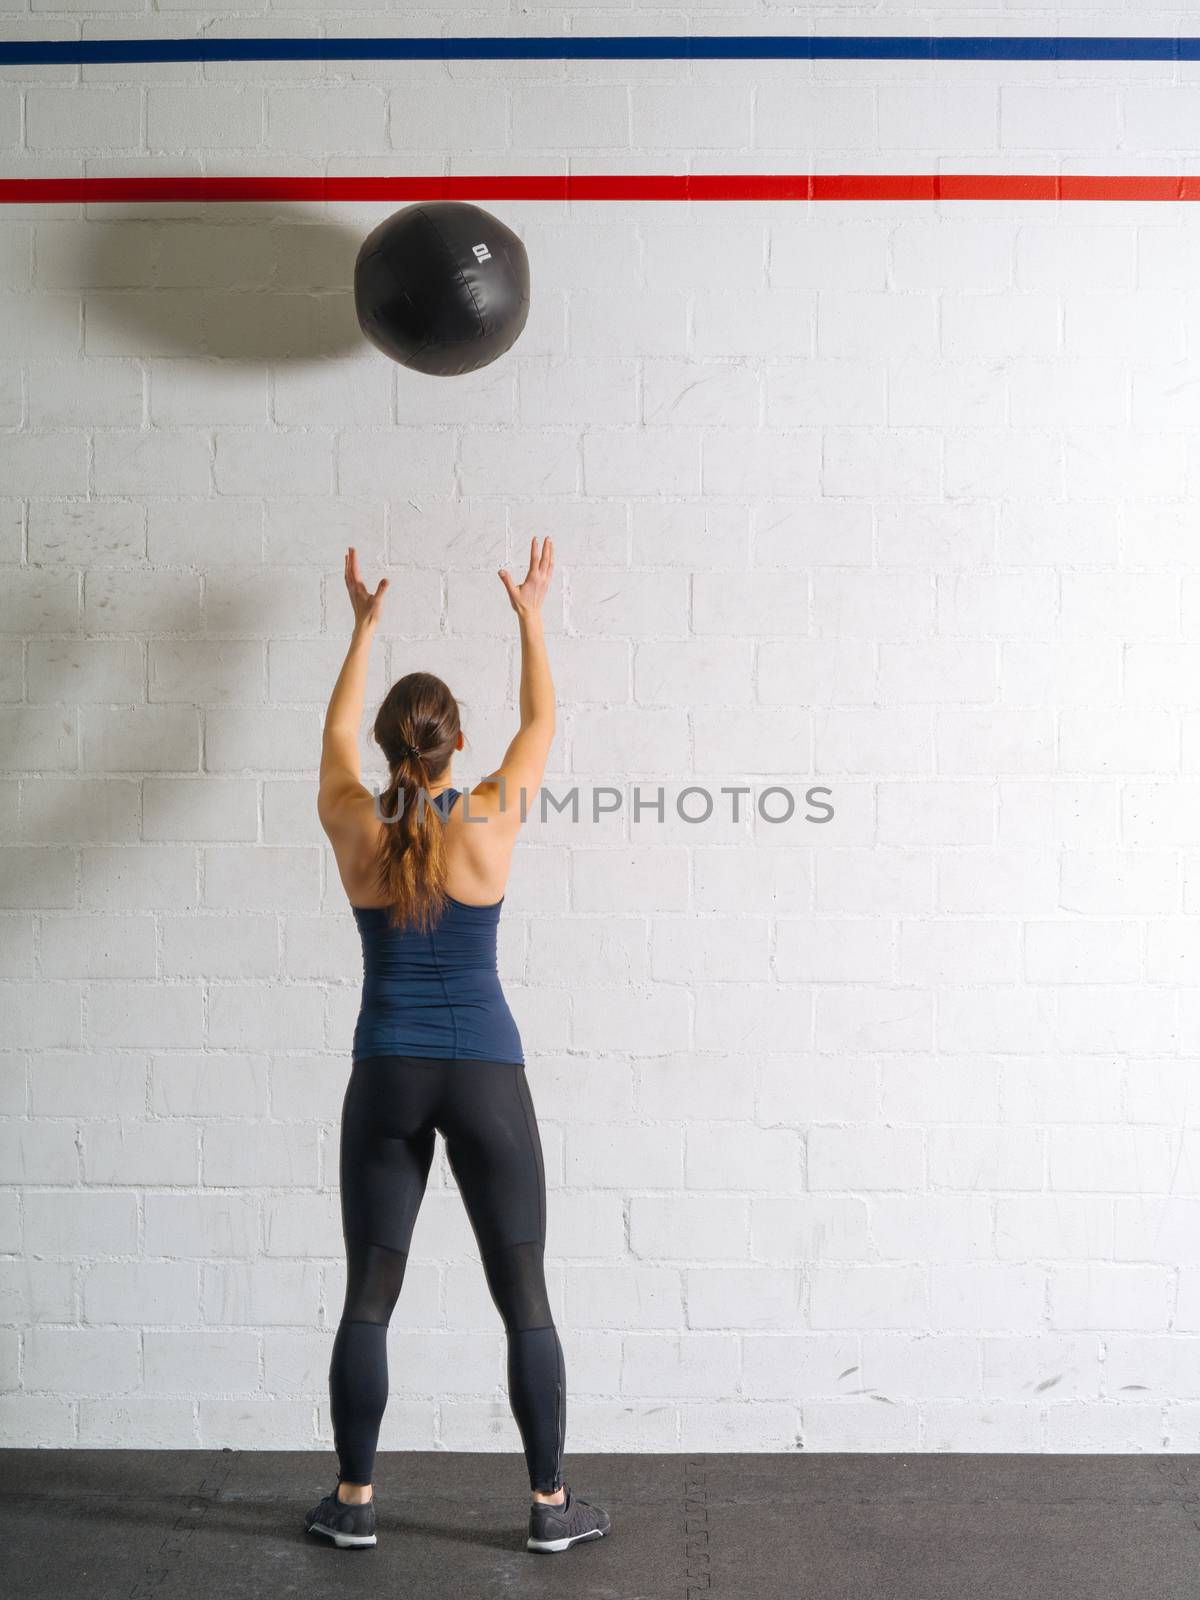 Photo of a woman exercising by throwing a medicine ball up against a wall in a gym.
